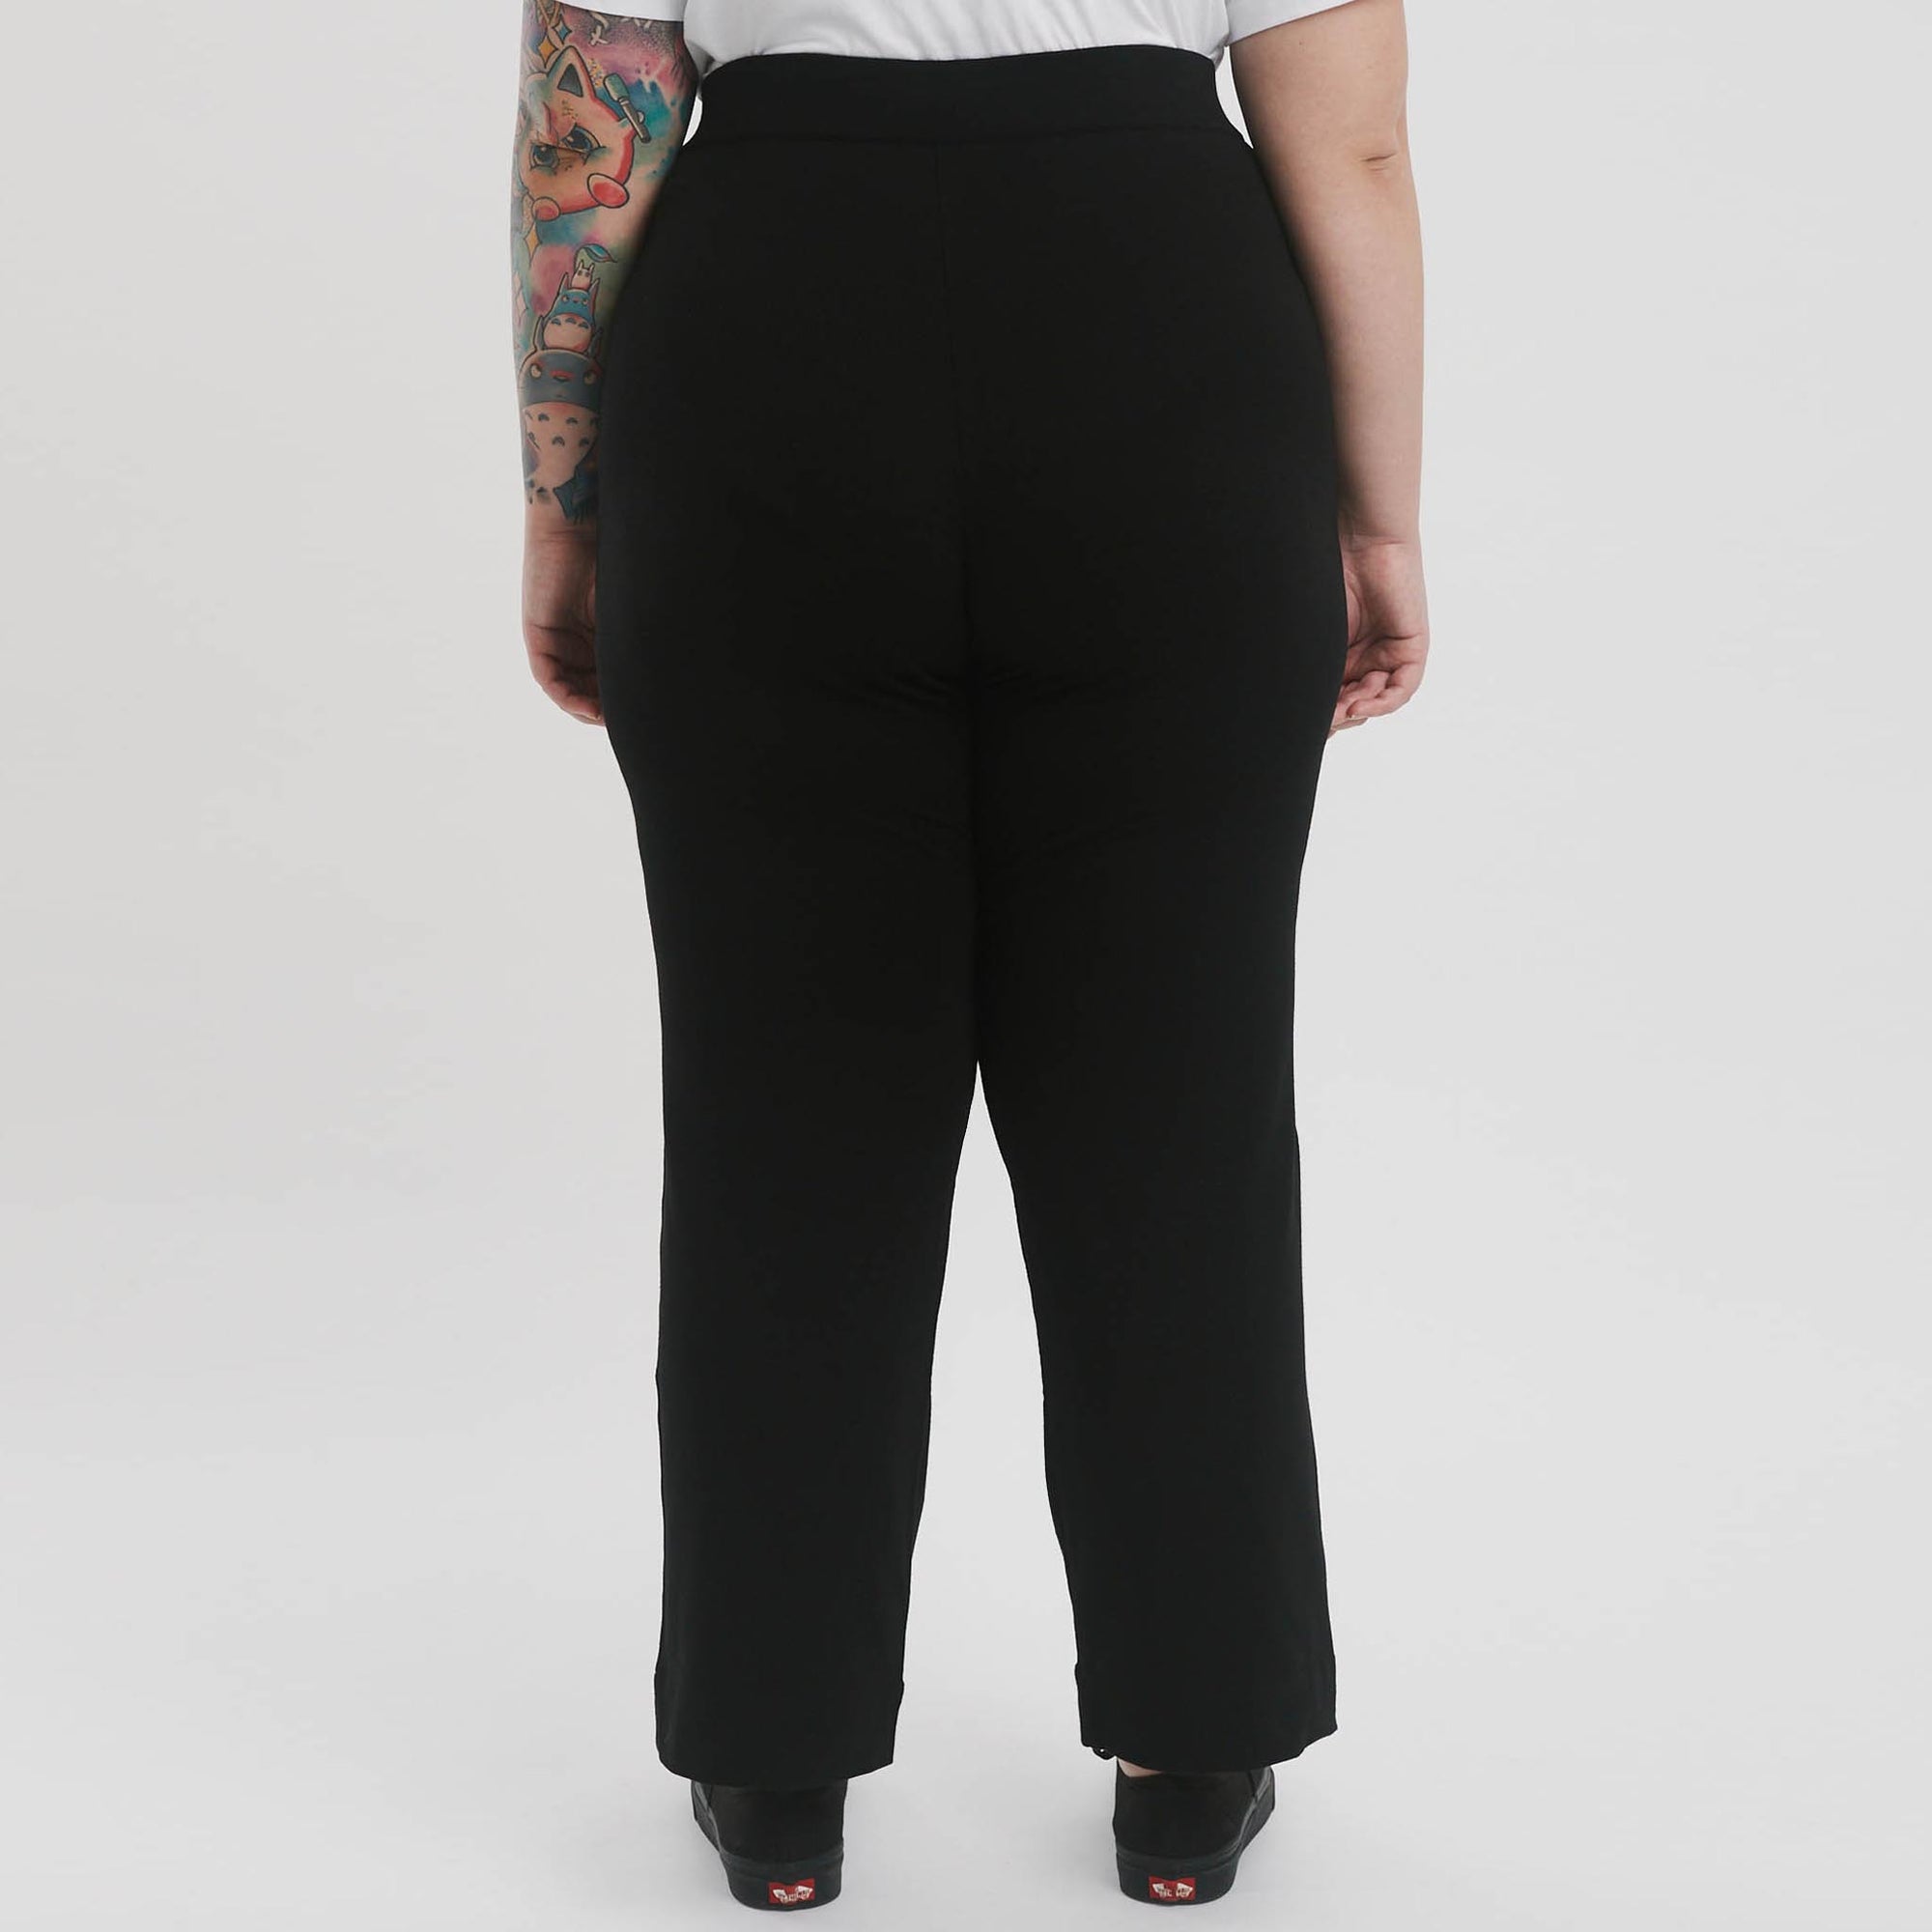 The Comfy Pants-Womens. No tags, no lables. The Shapes United